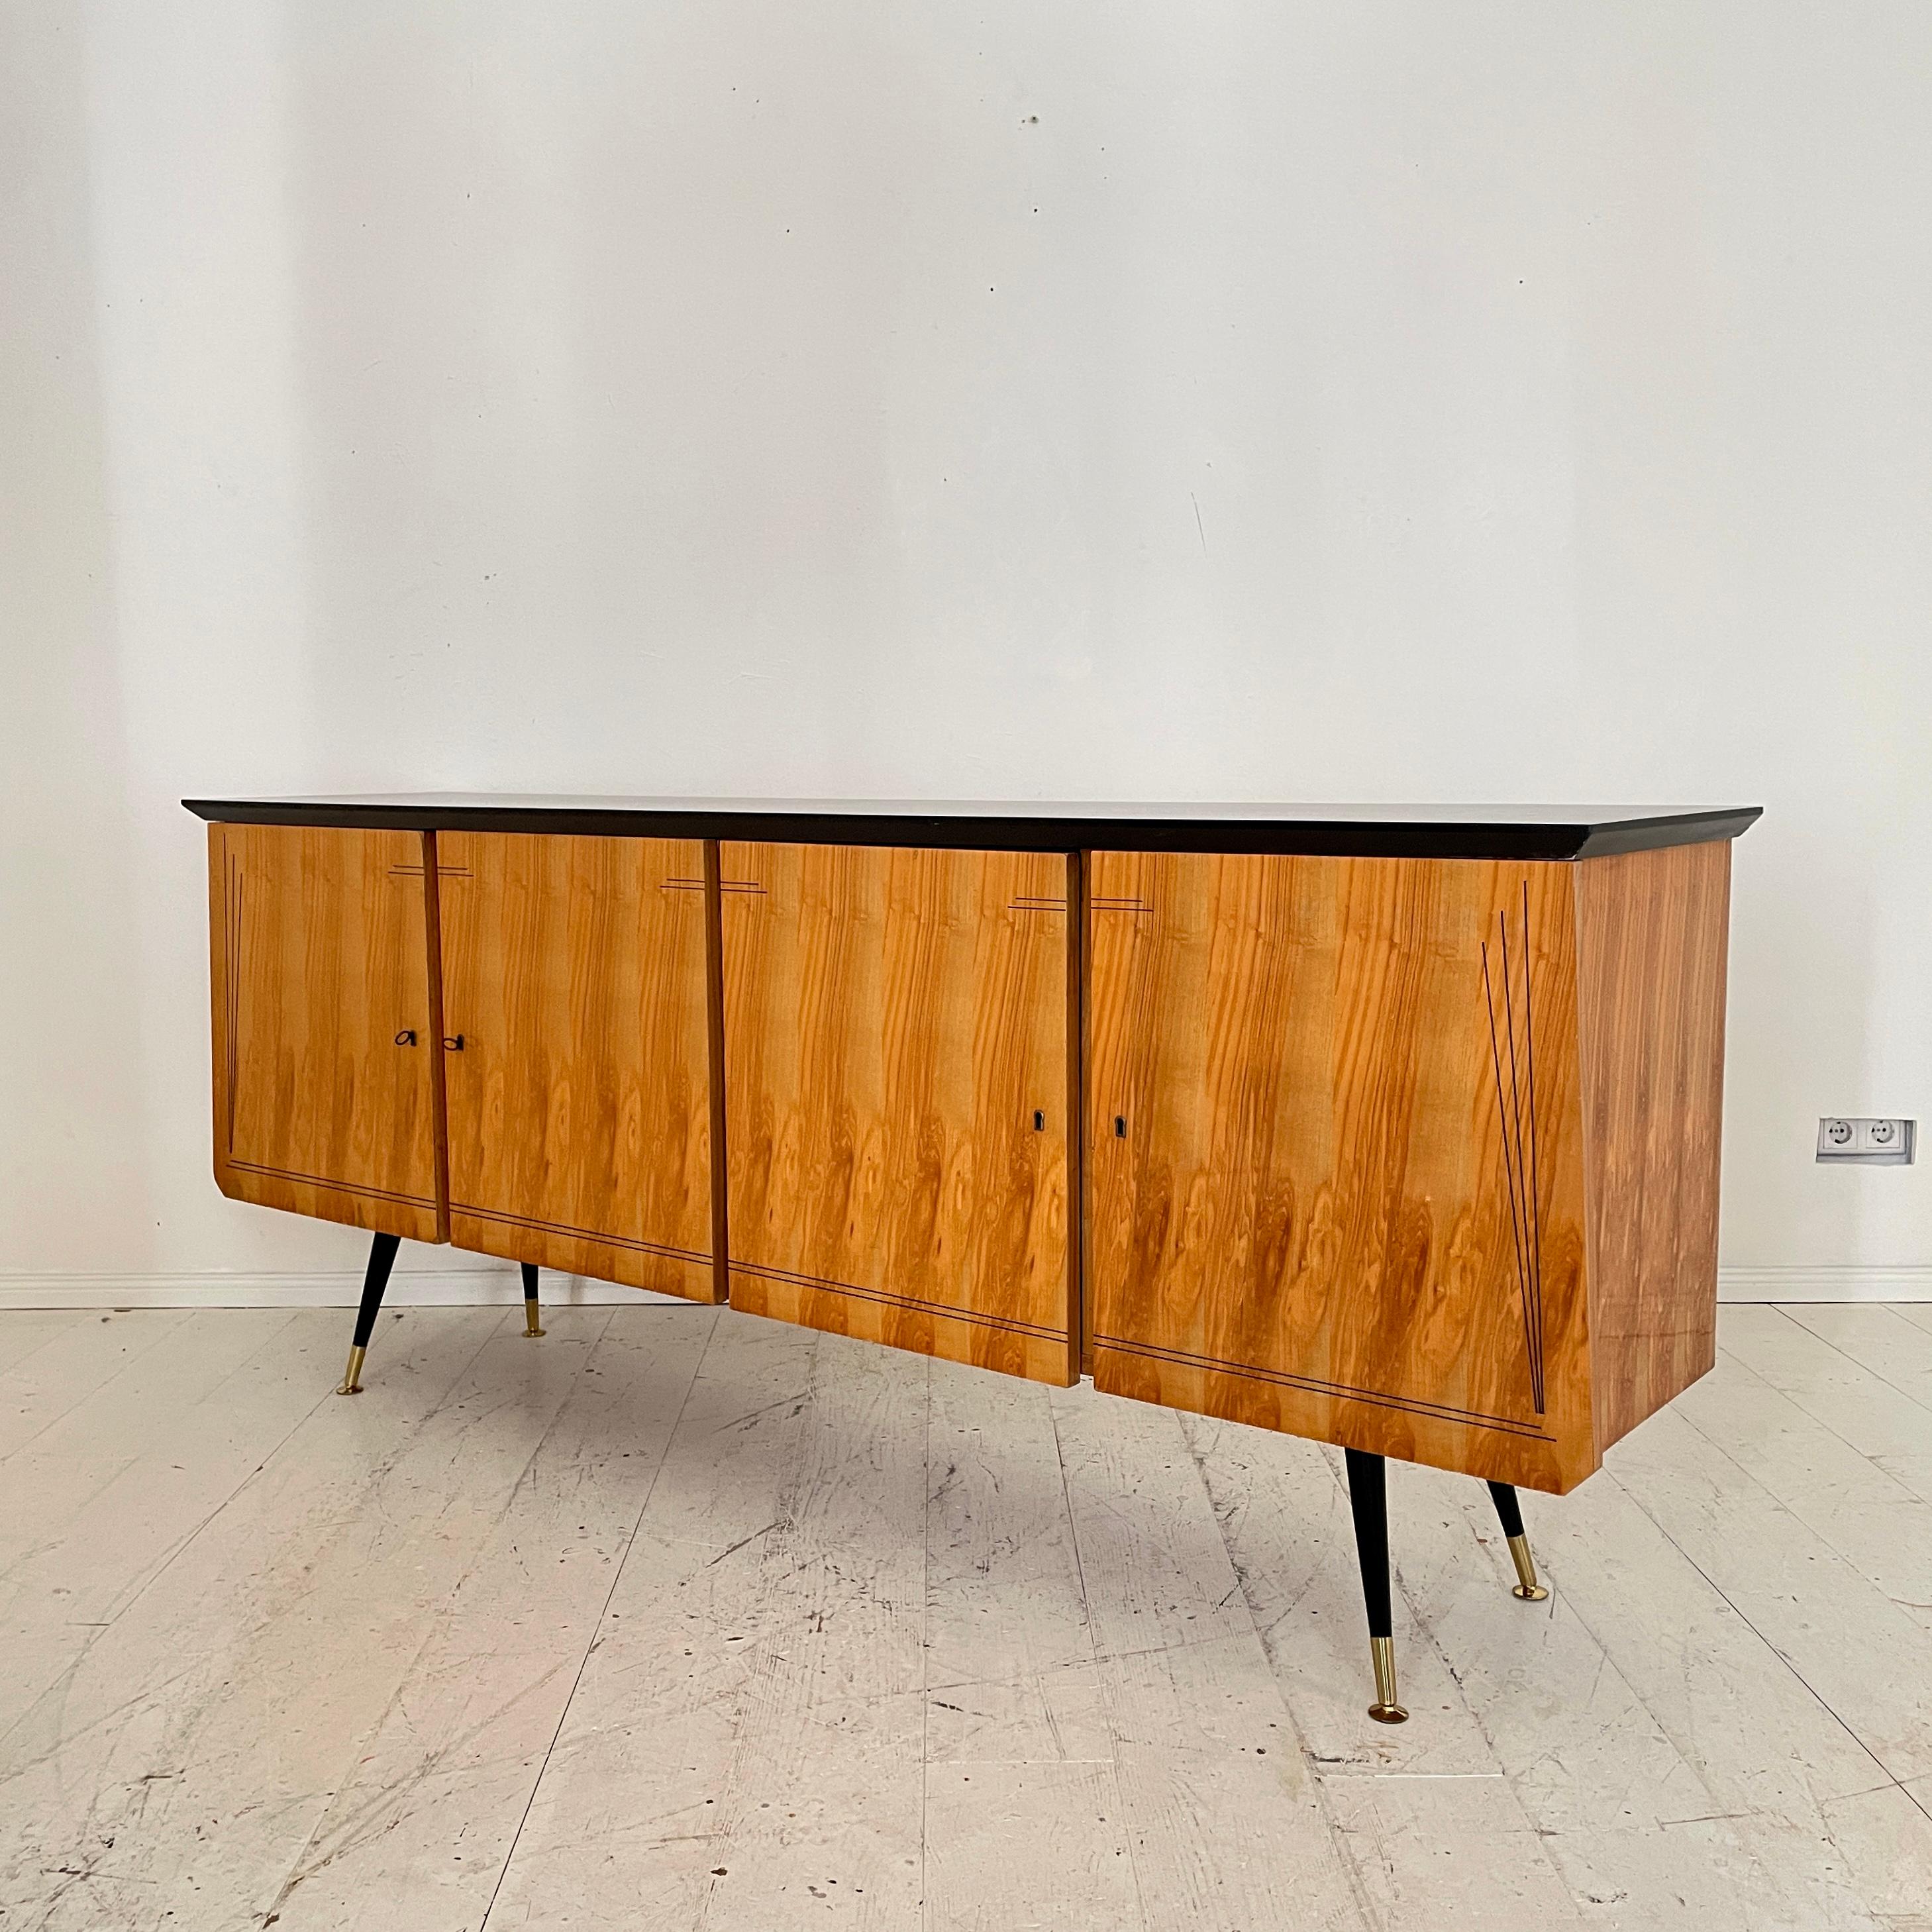 Italian Midcentury Sideboard with 4 Doors in Ash, Black and Brass, Around 1950 For Sale 1